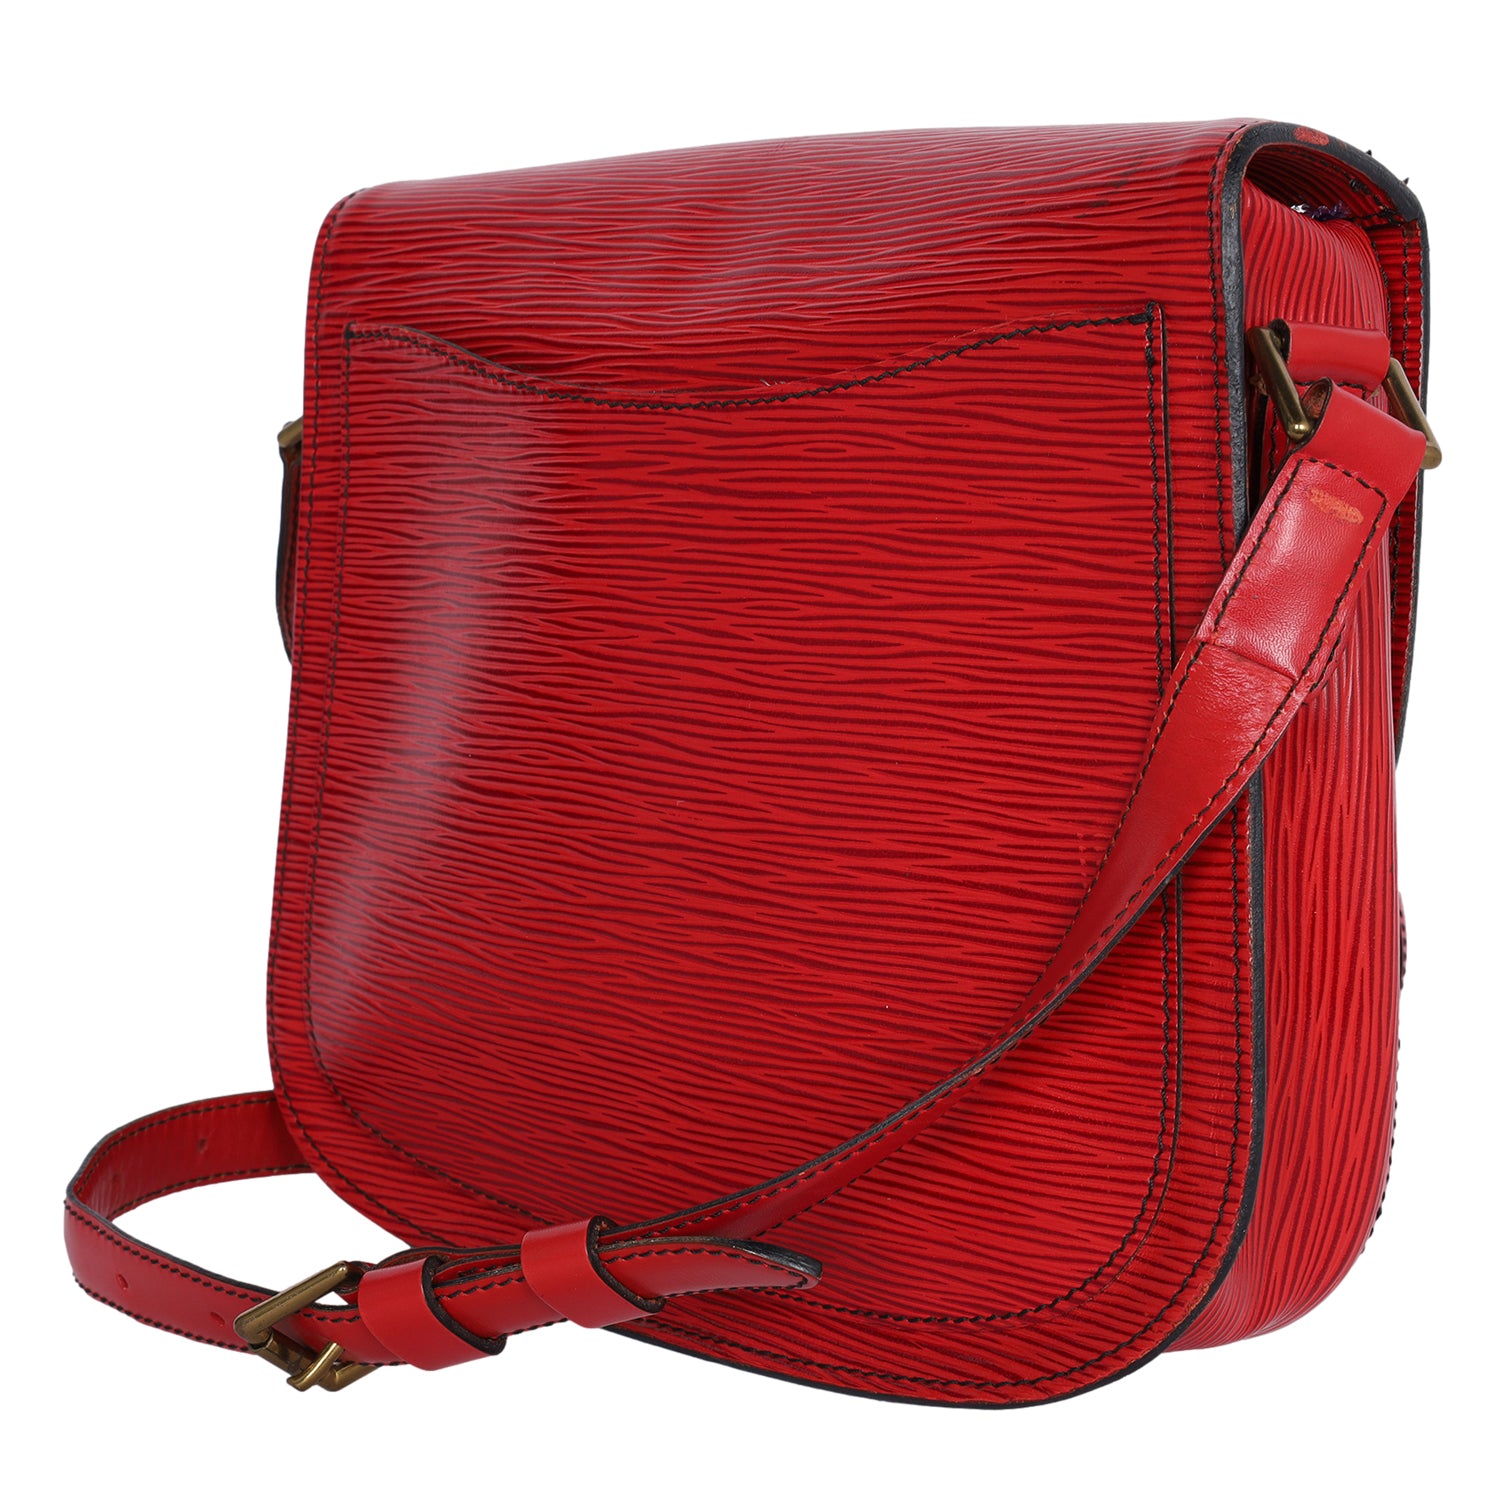 LOUIS VUITTON Epi Buci Shoulder Bag in Red - More Than You Can Imagine